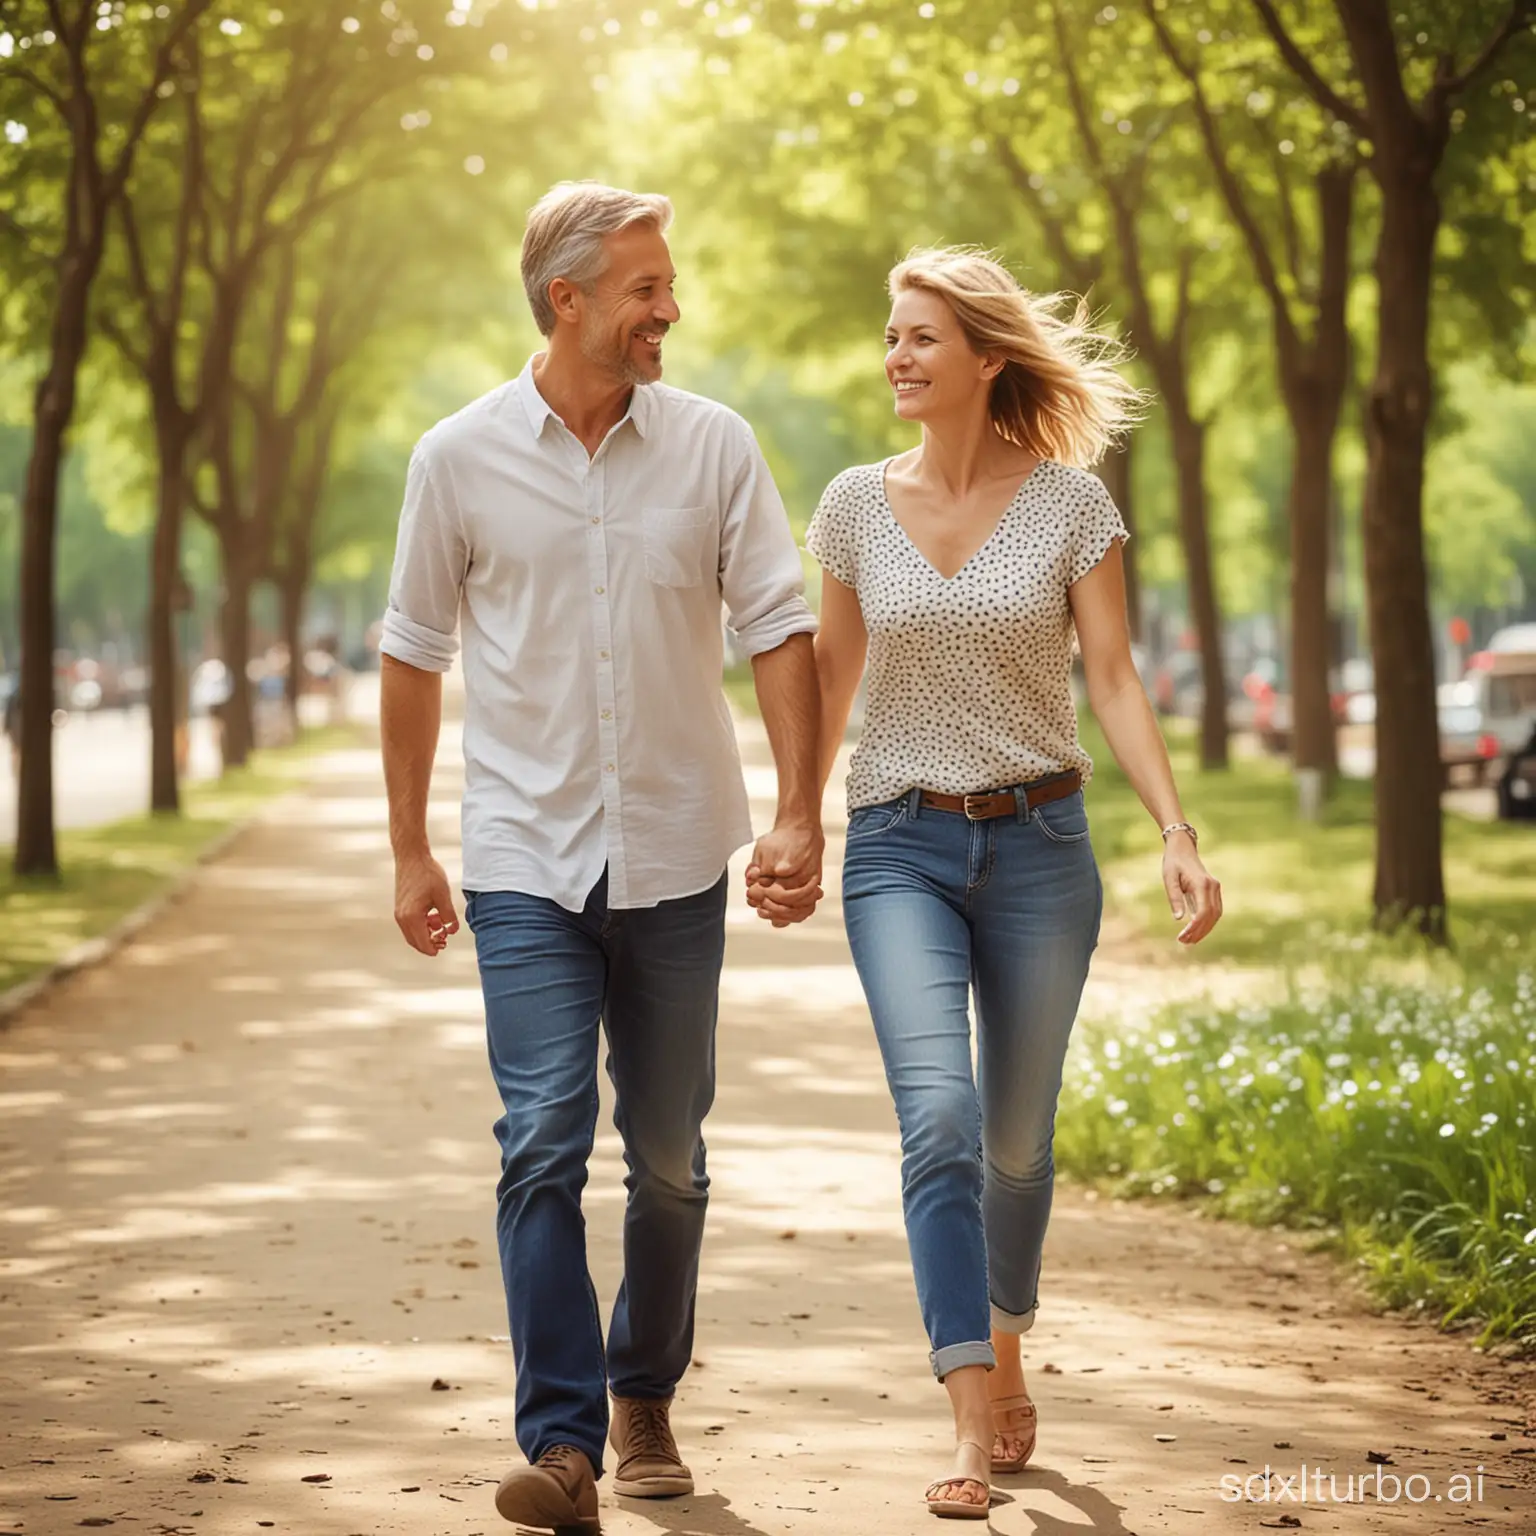 middle age couple dinamic move summer happy stock photo high resolution blurred background outdoor city park bokeh motion blur casual